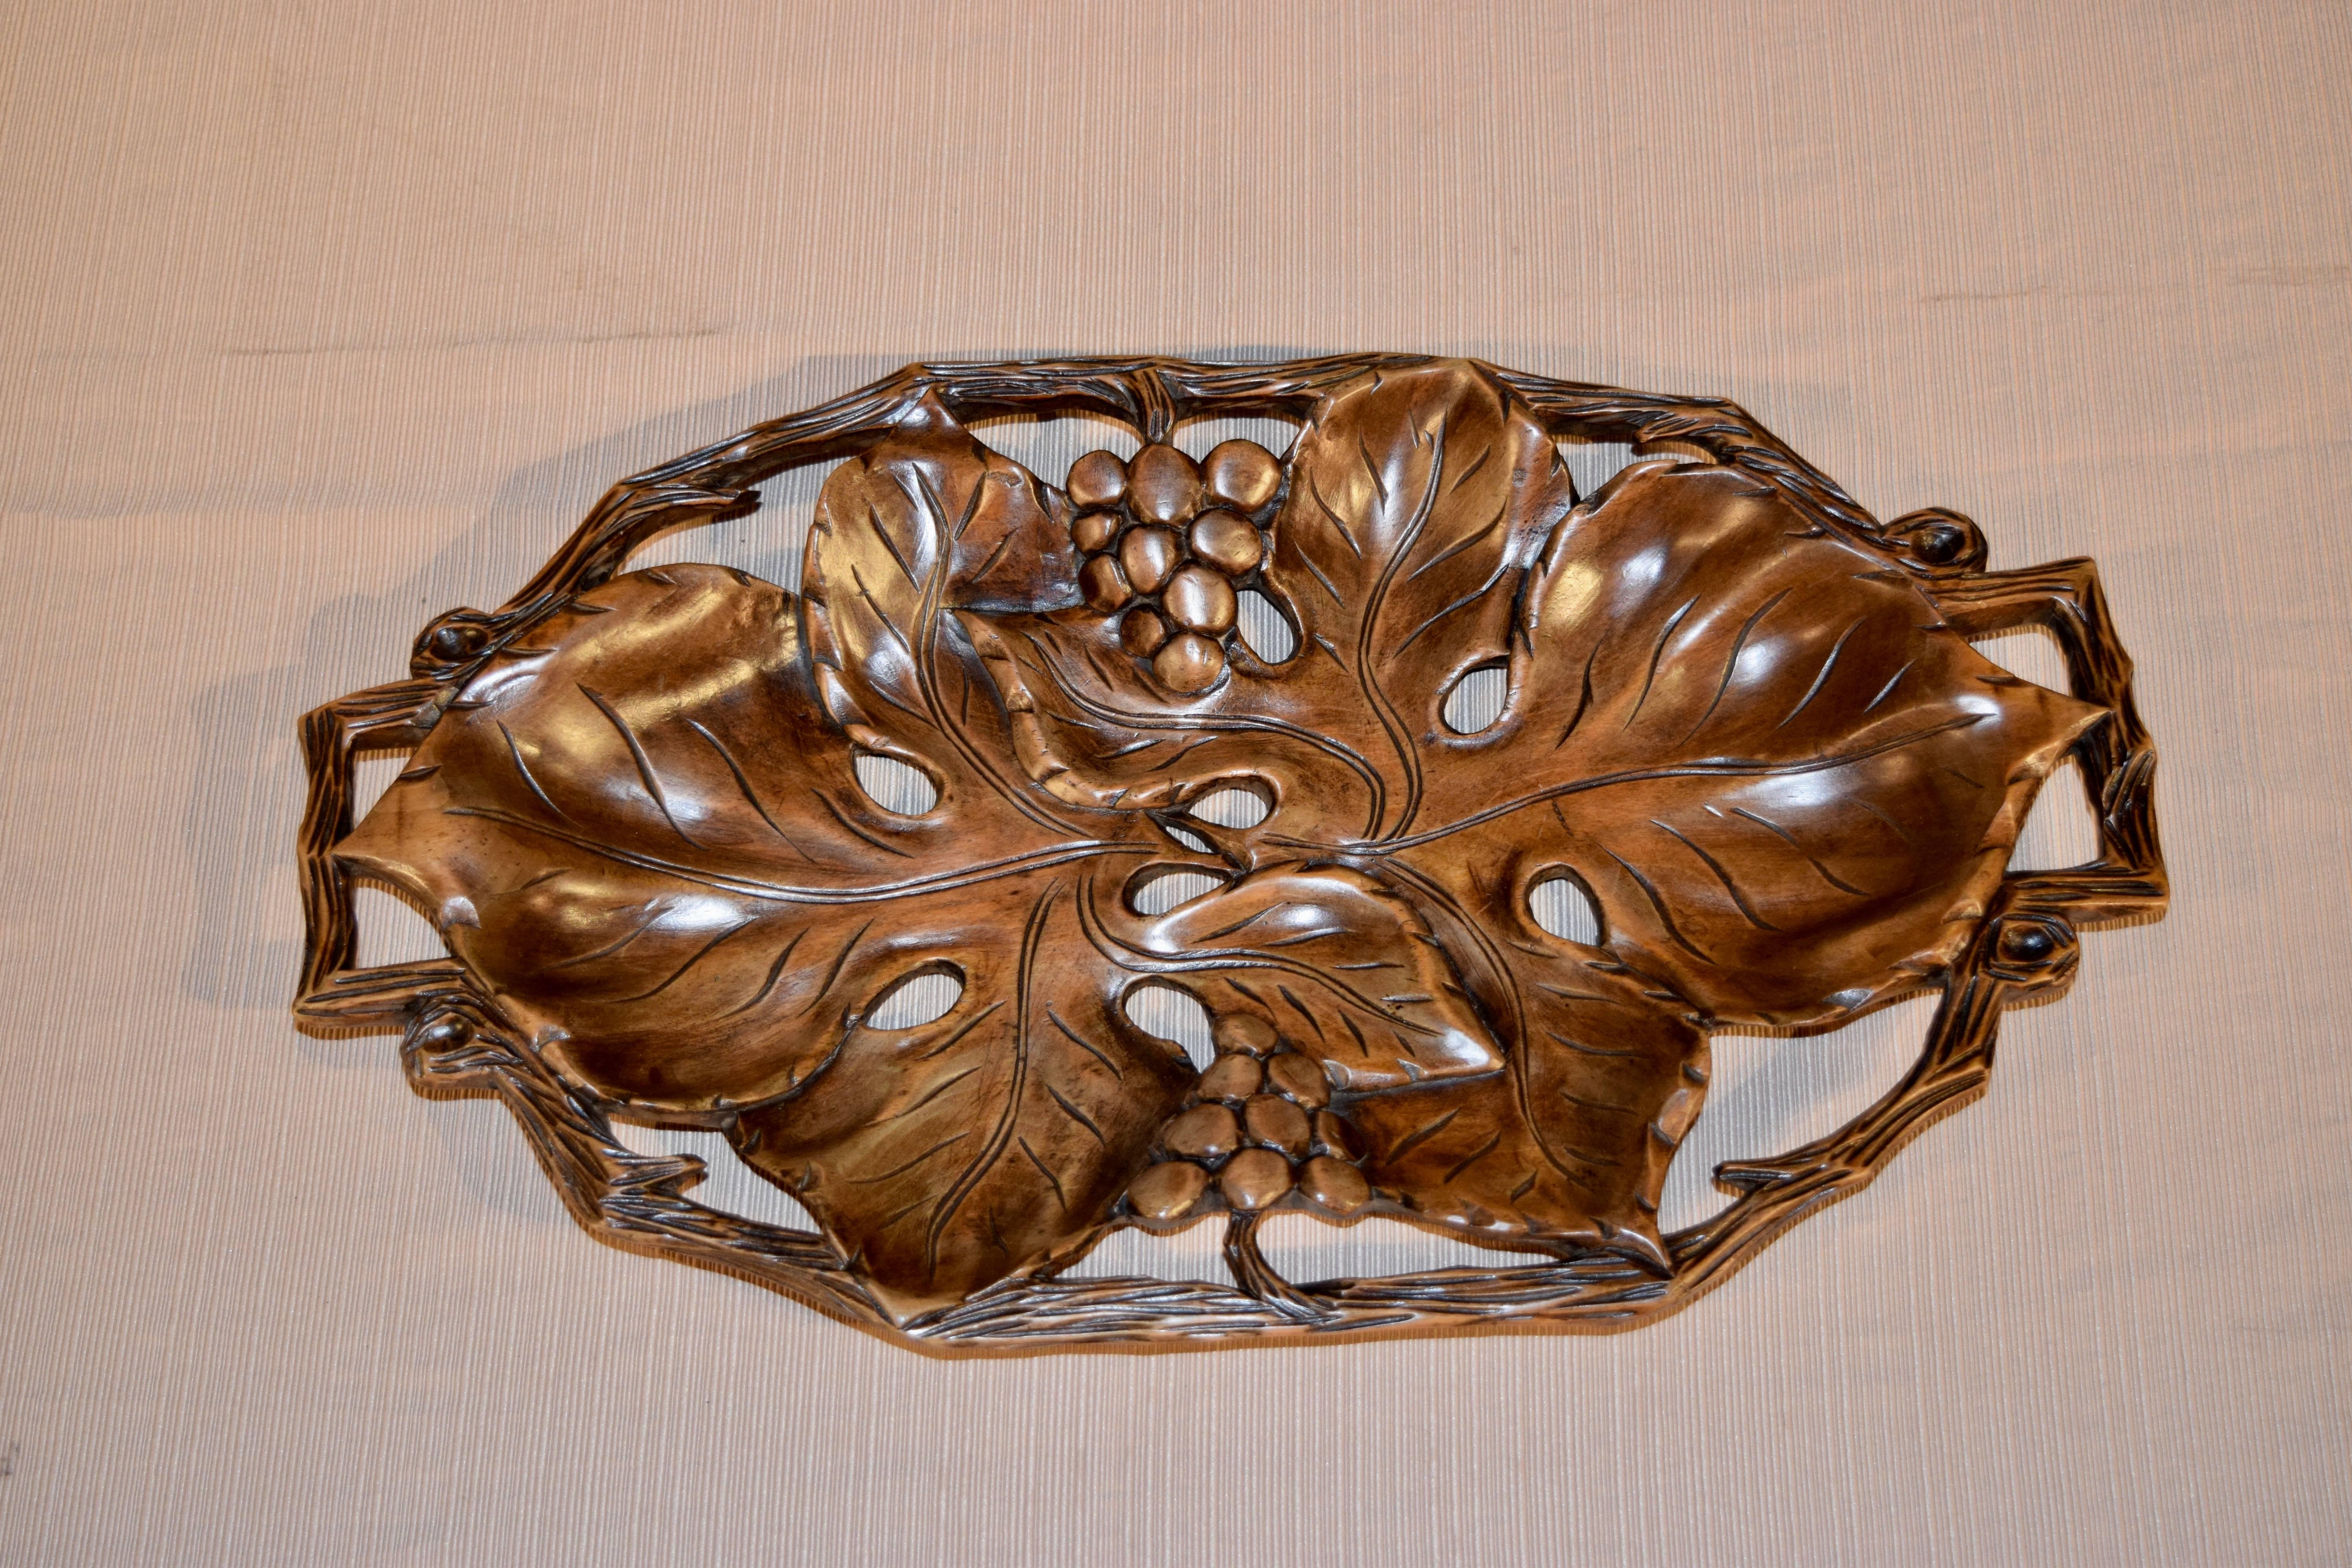 19th century Black Forest hand-carved pierced tray depicting grape leaves, grapes and branches. Wonderful size!